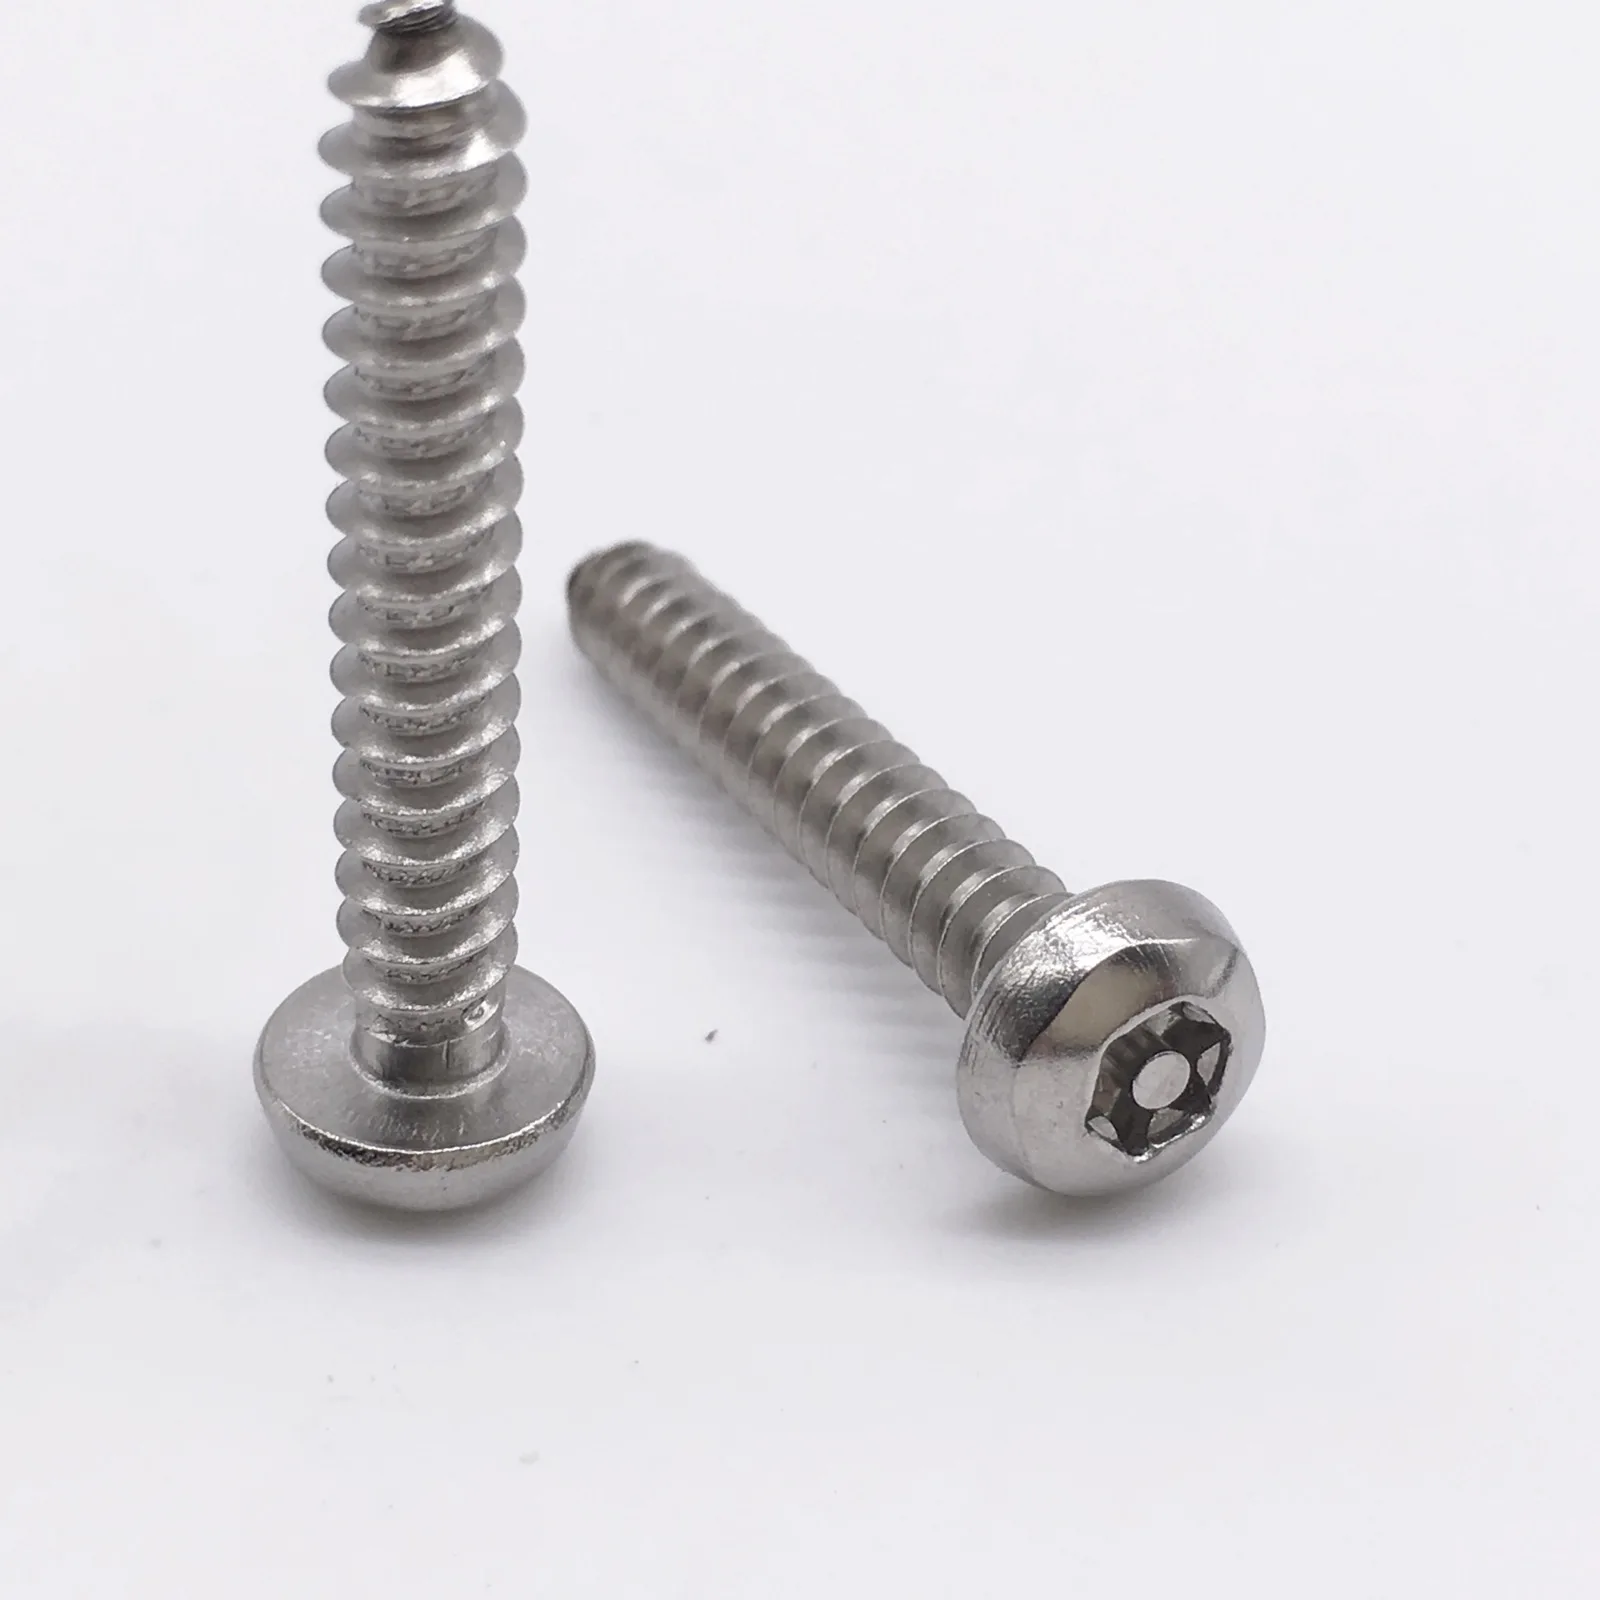 ST4.8 Security Self Tapping Screw Pin in Torx Drive Pan Head Stainless Steel T25